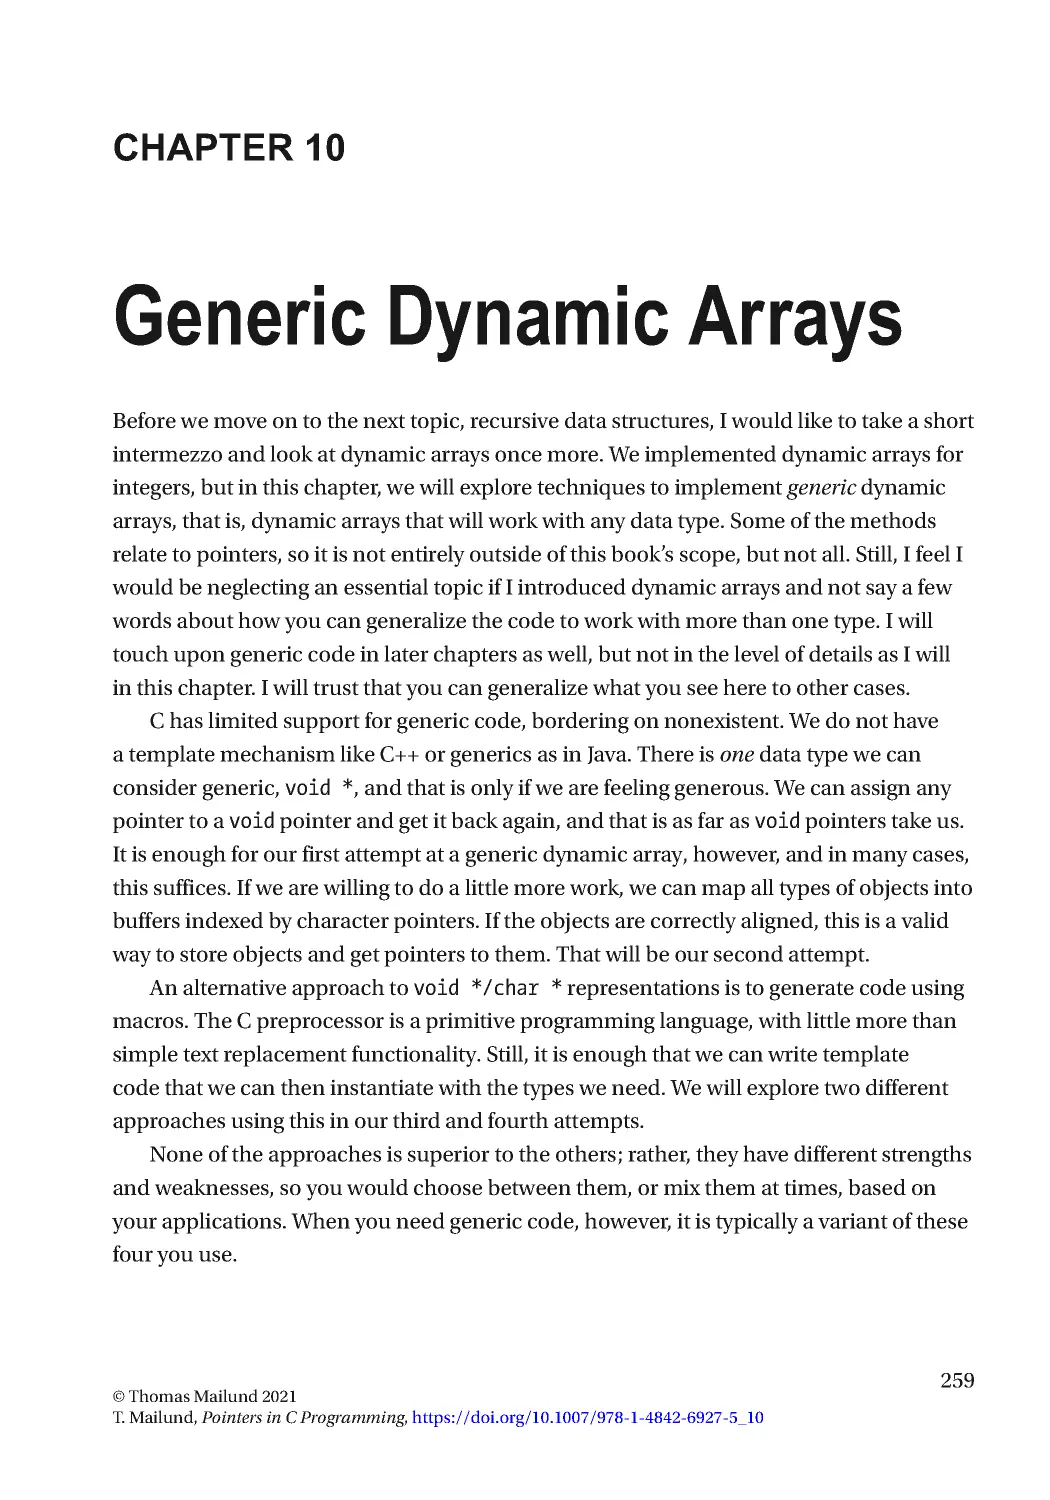 Chapter 10: Generic Dynamic Arrays